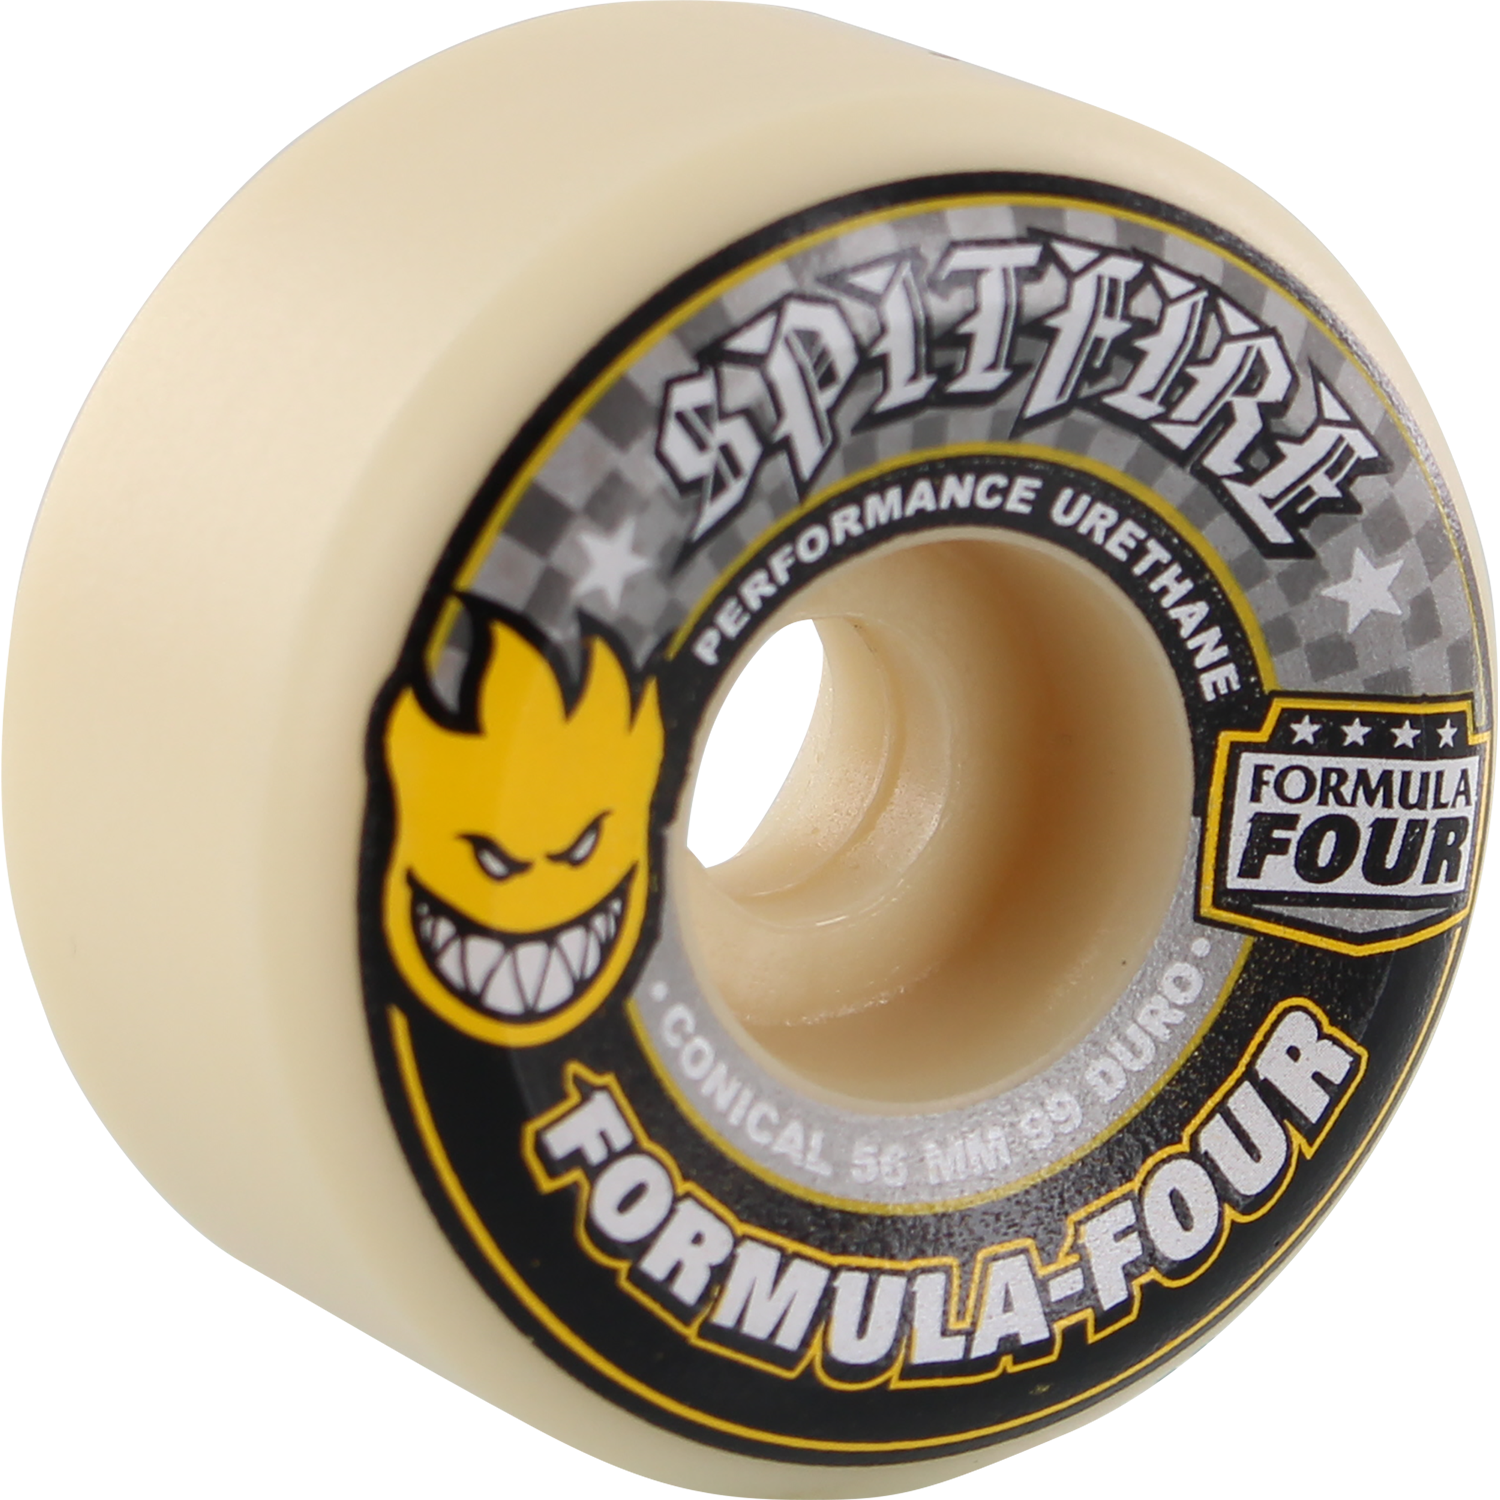 Spitfire Formula Four Conical Full Skateboard Wheels 56MM 99a Yellow/Black - Invisible Board Shop